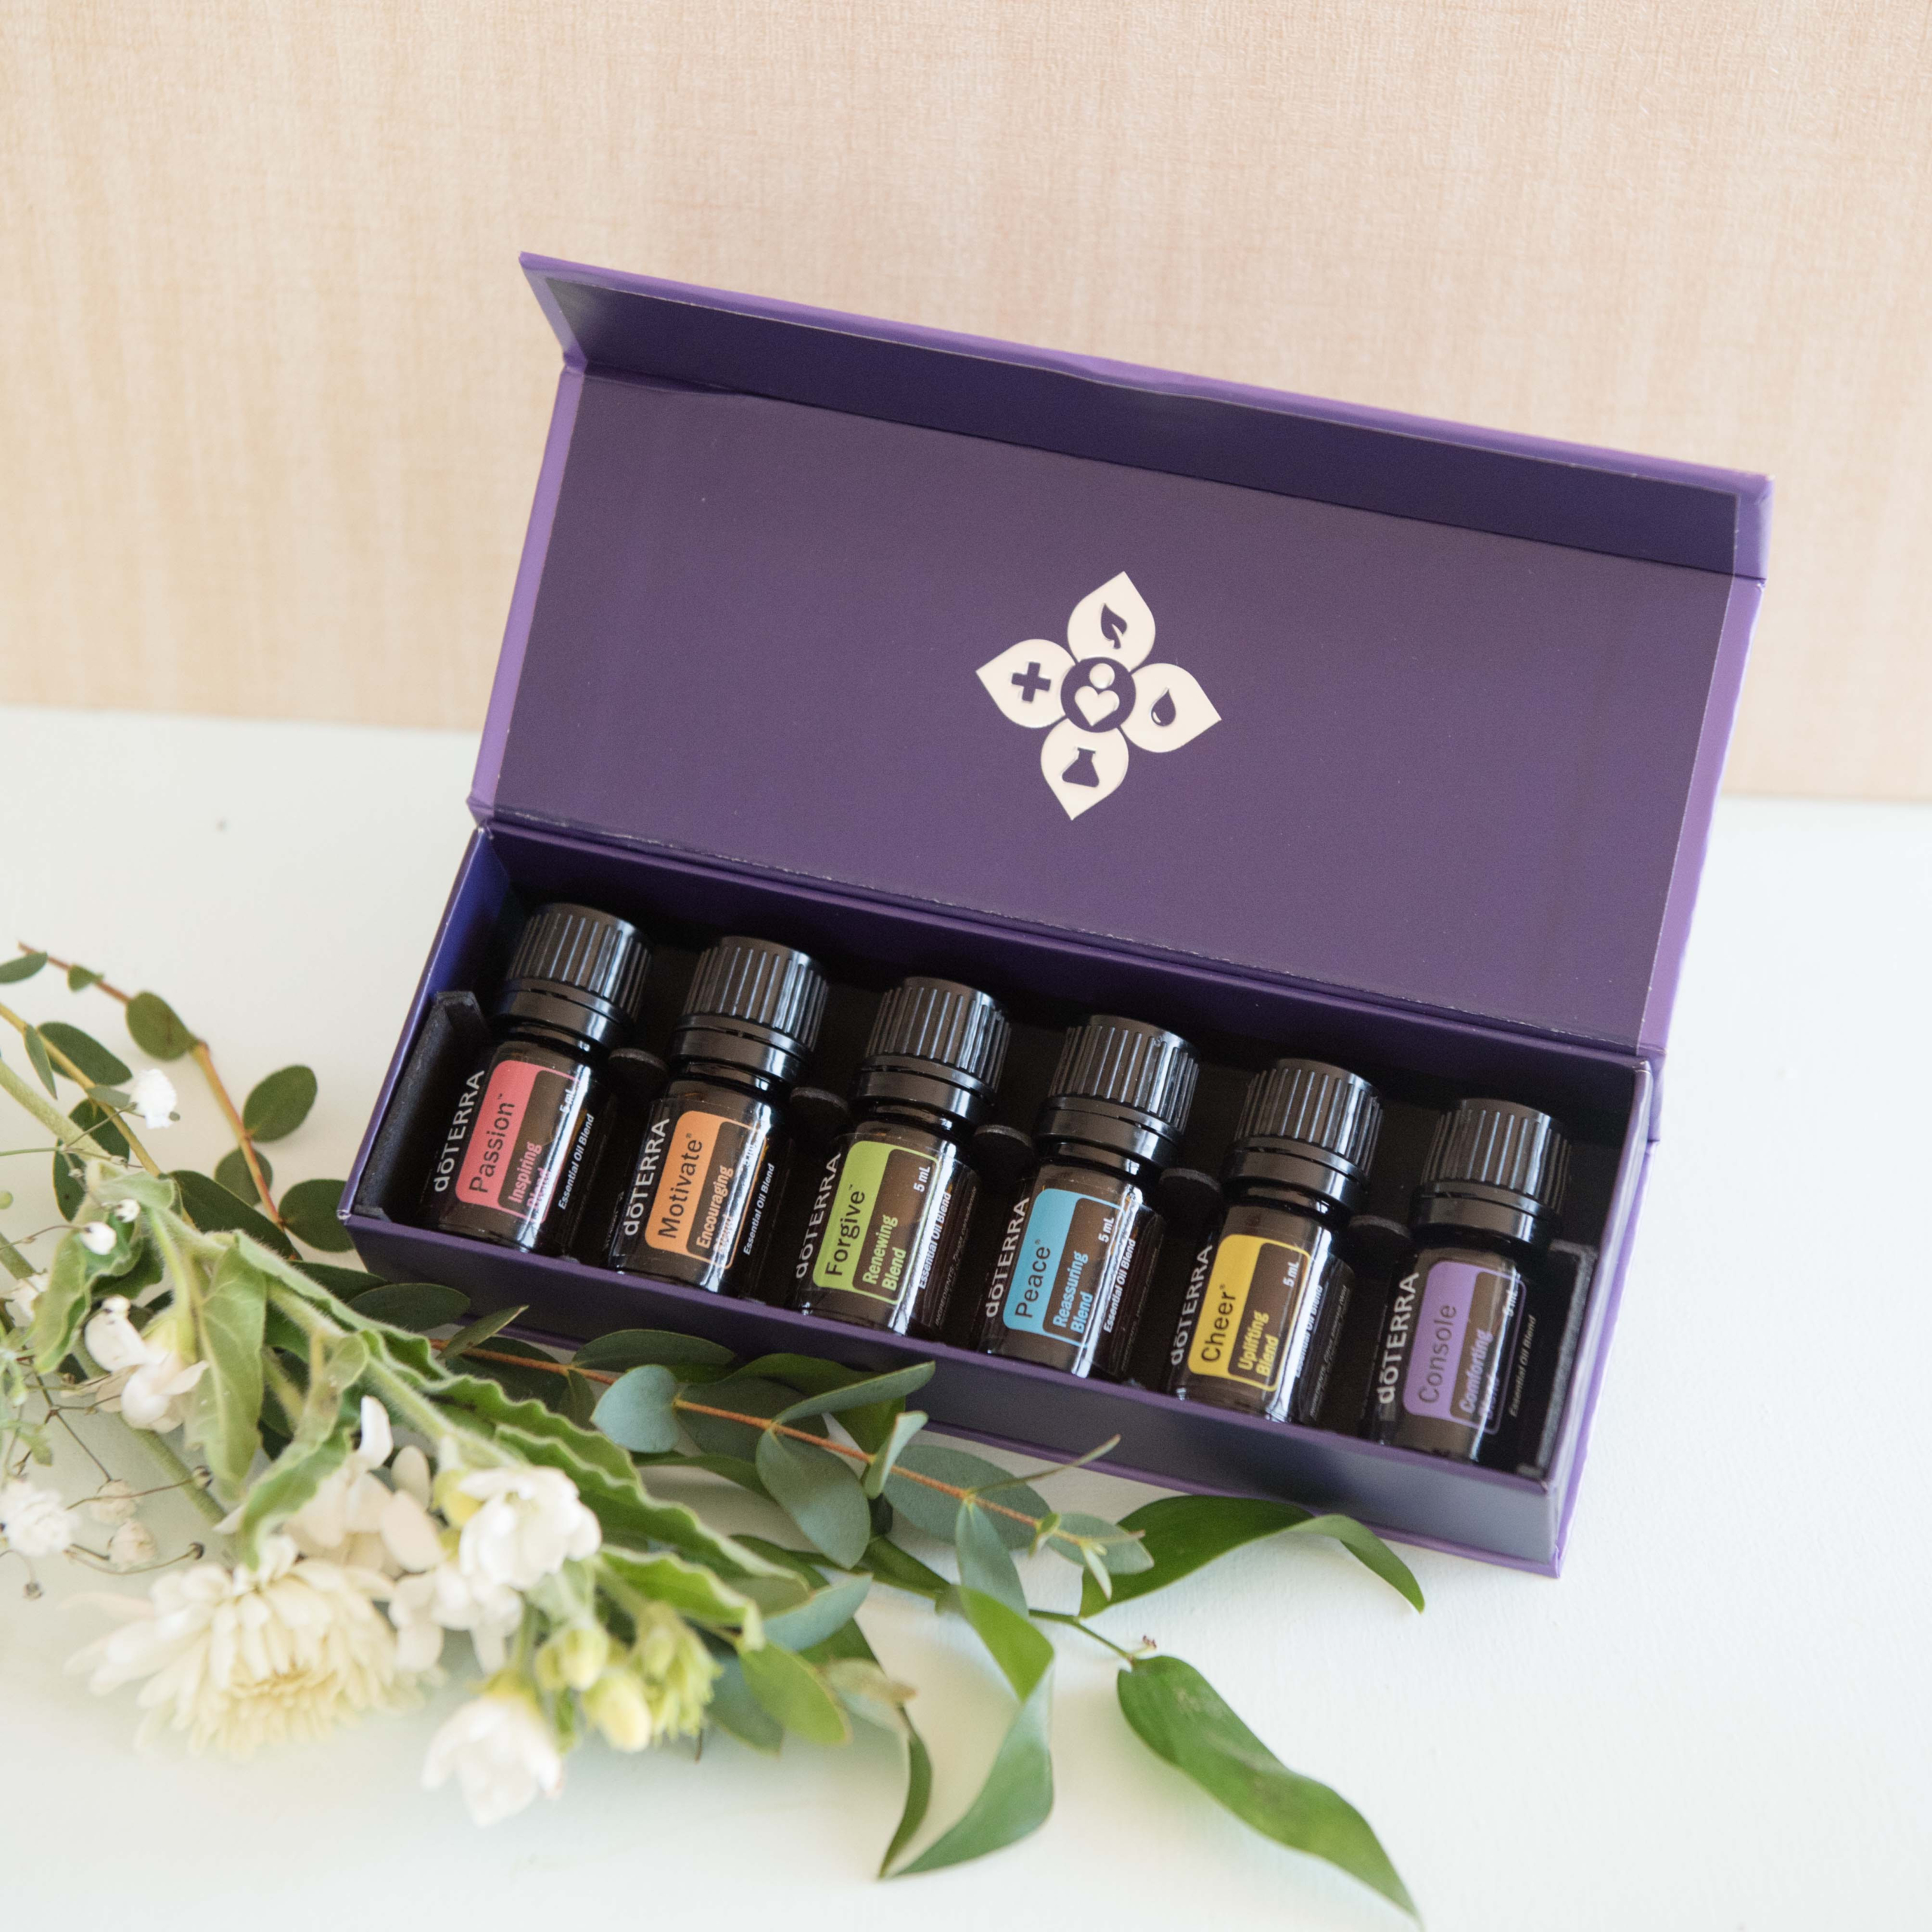 Control emotions with essential oils